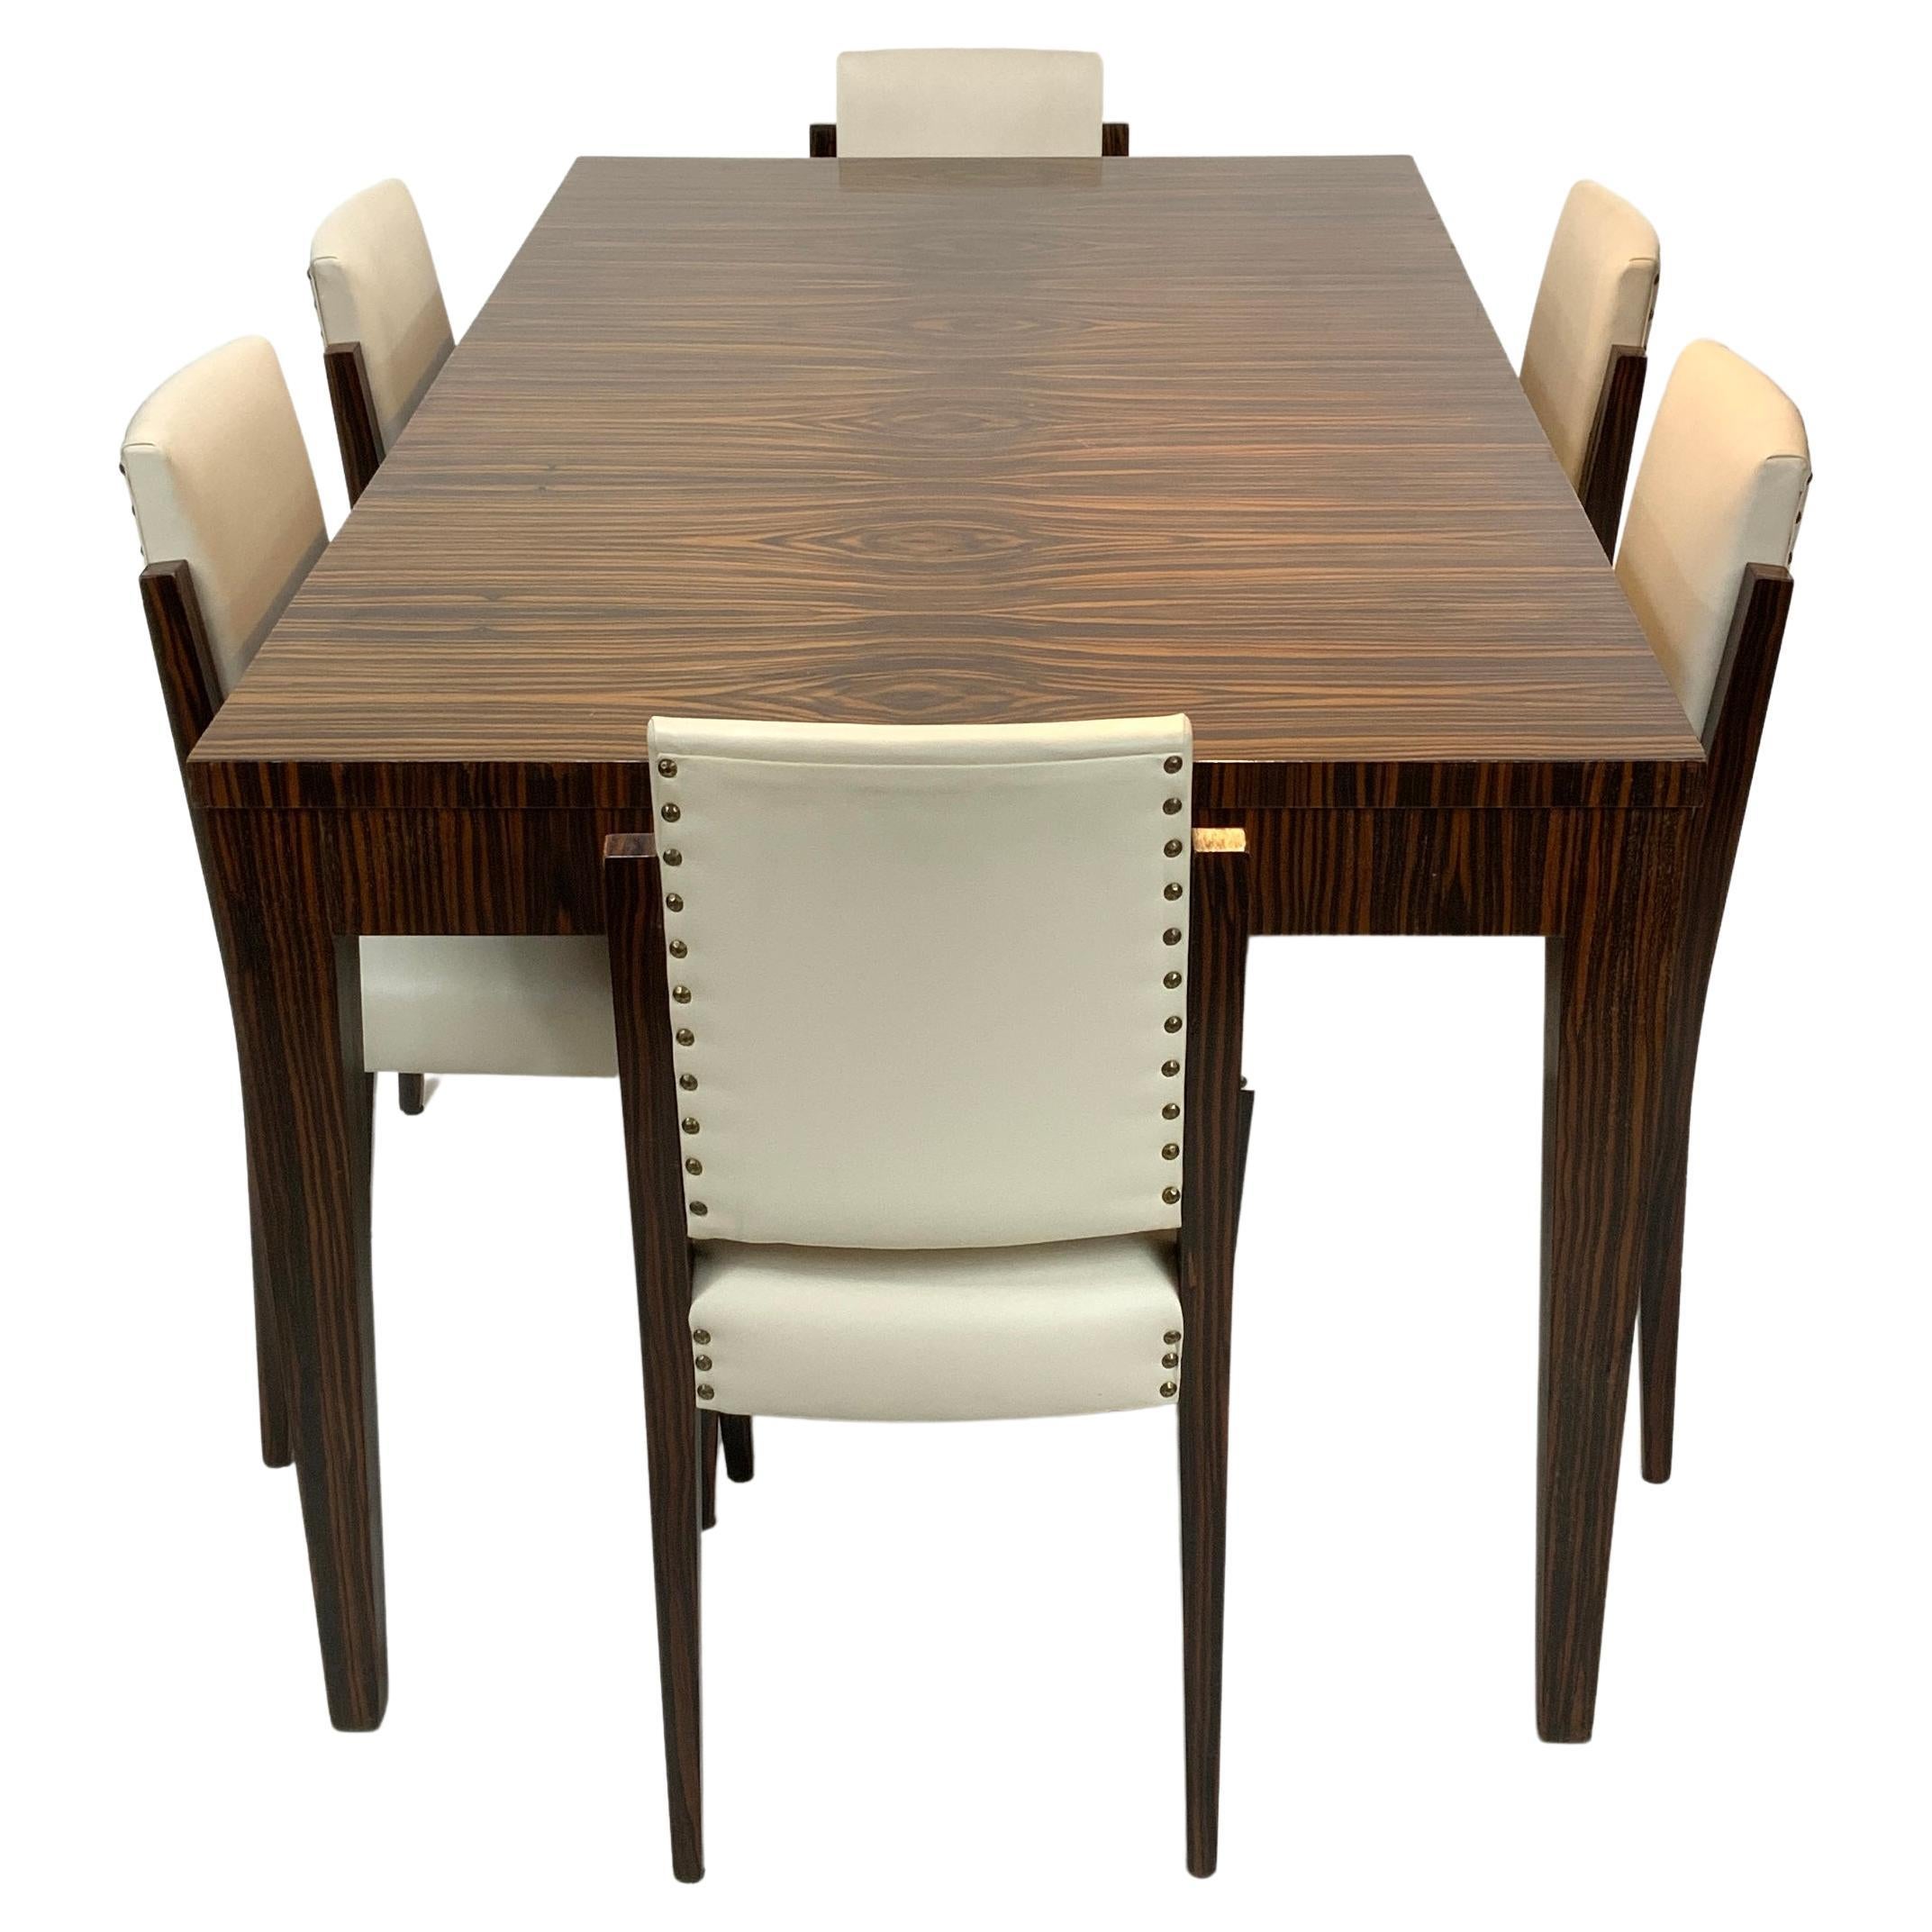 Art Deco Macassar Ebony Dining Table and Chairs, 1930’s - 1940’s For Sale